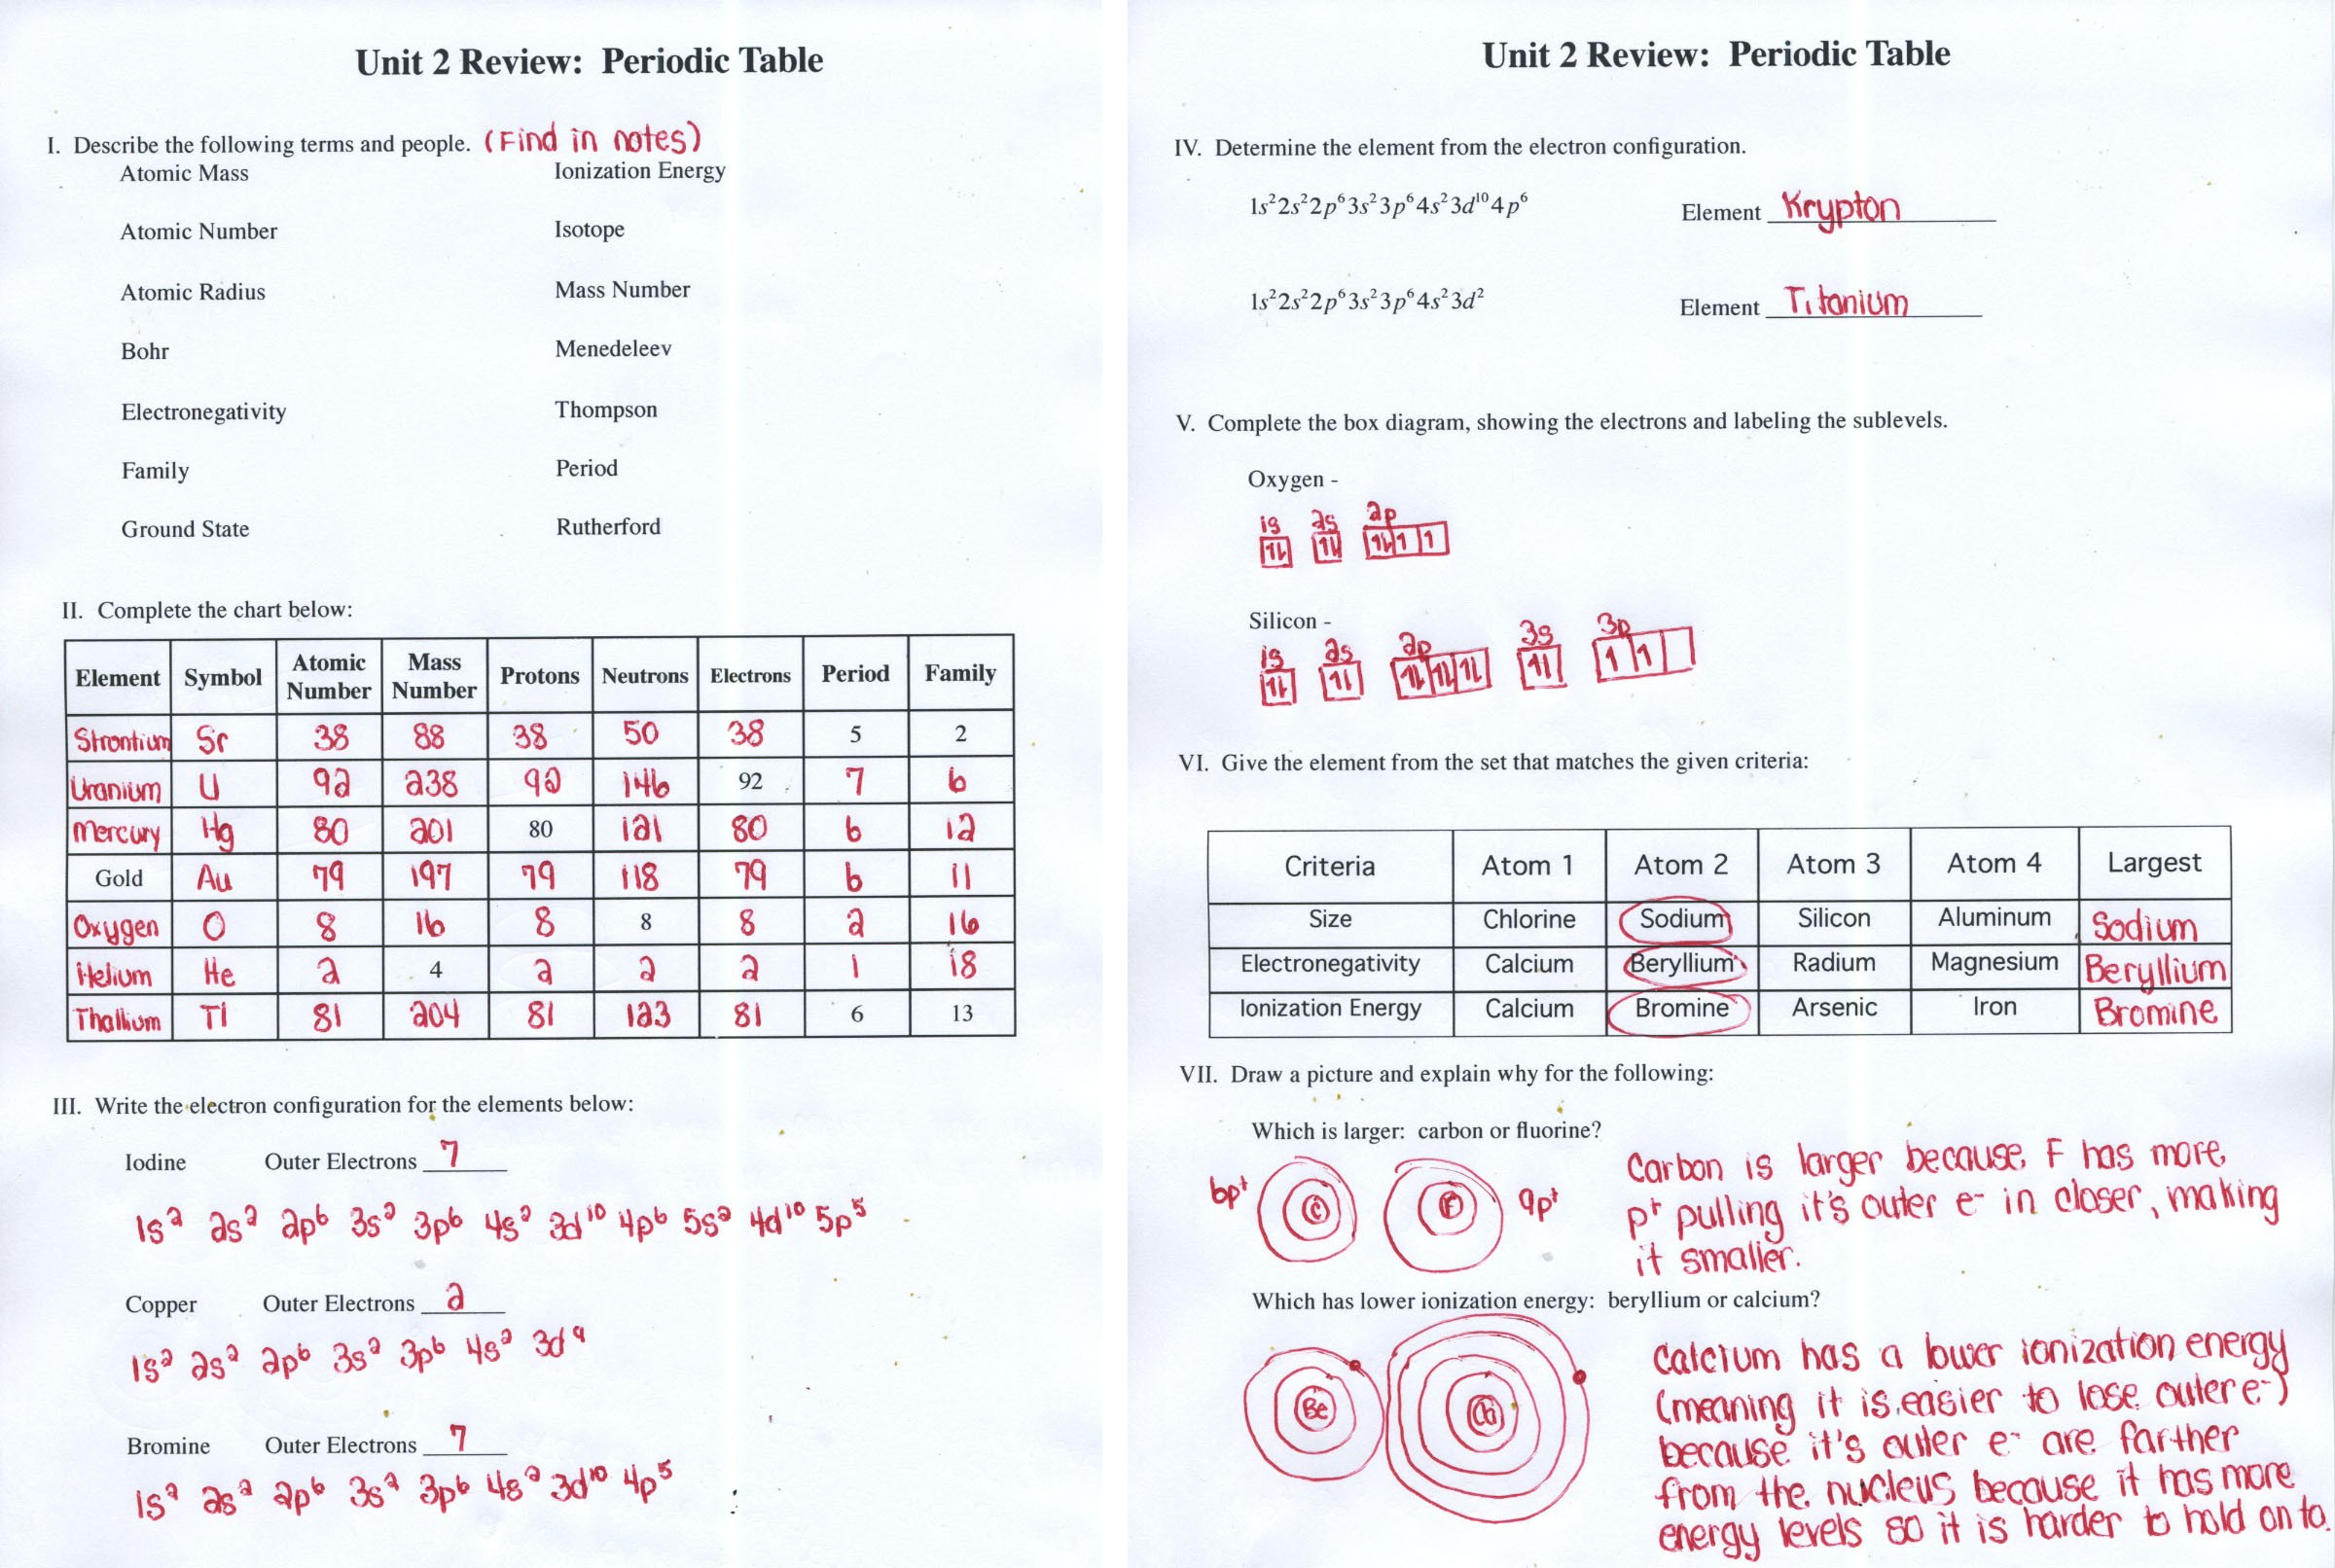 Periodic Table Trends Worksheet Answer Key